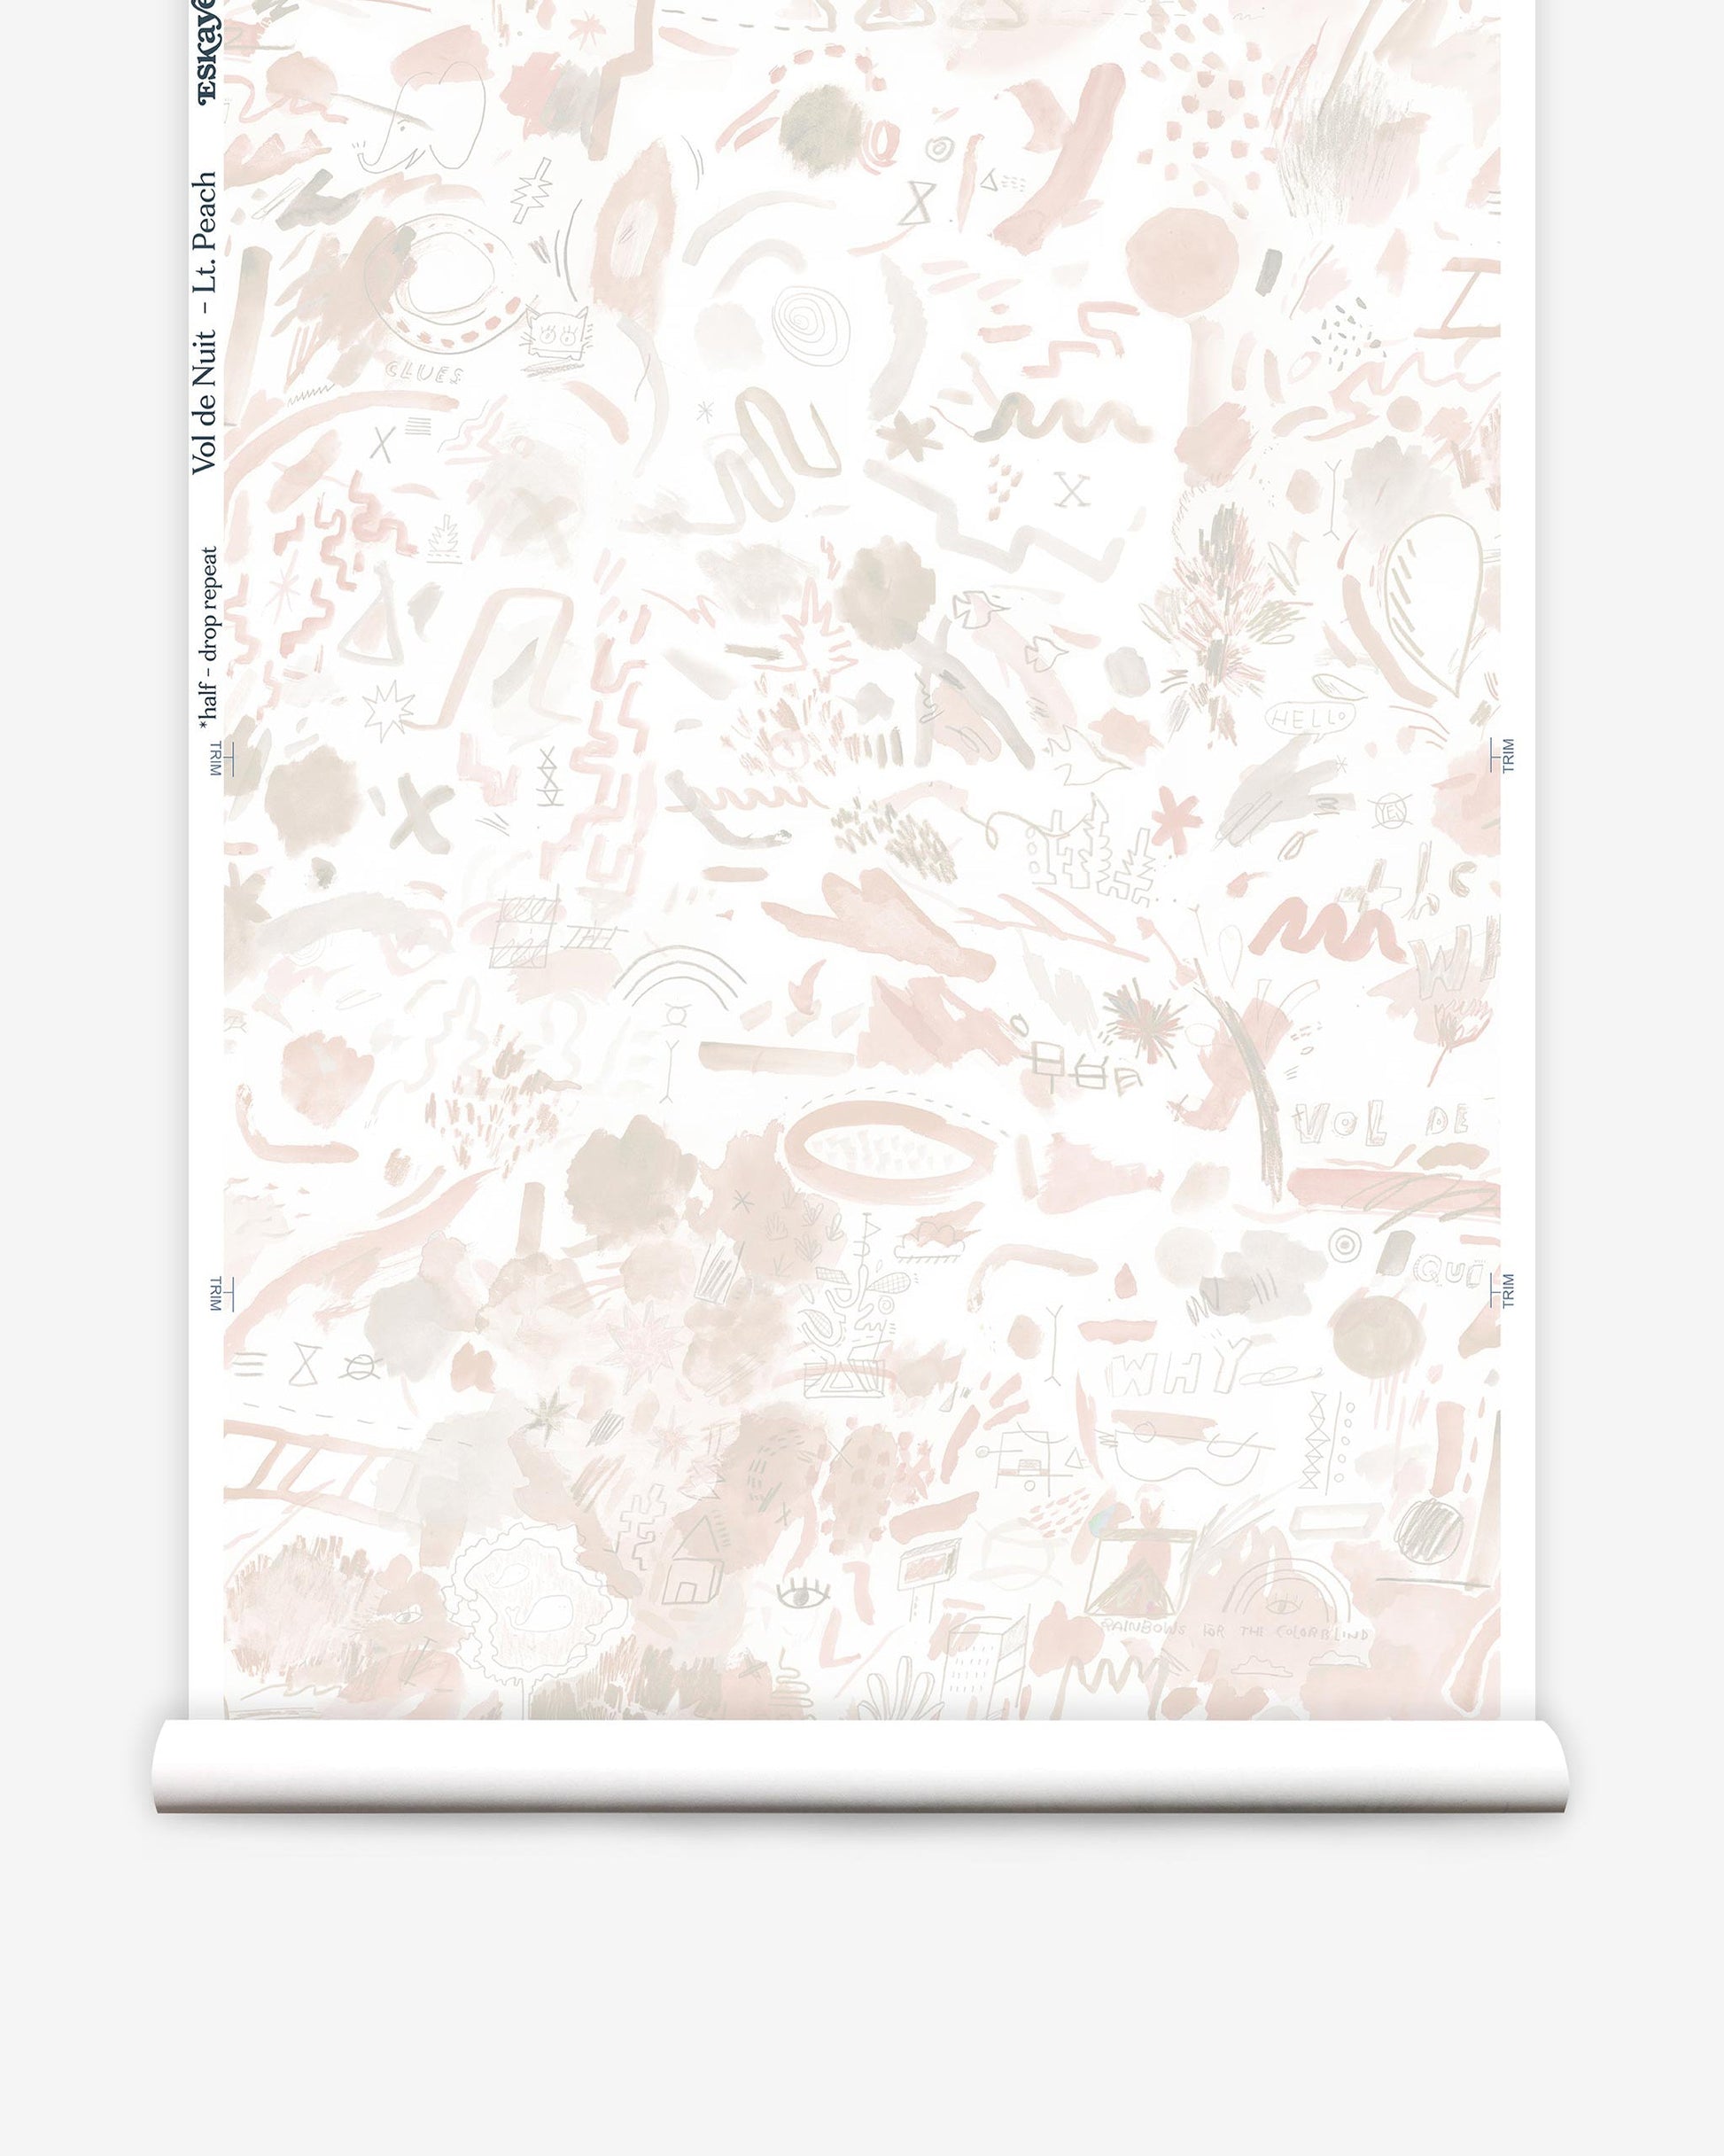 A roll of Vol de Nuit Wallpaper Light Peach with a pink and white pattern on it